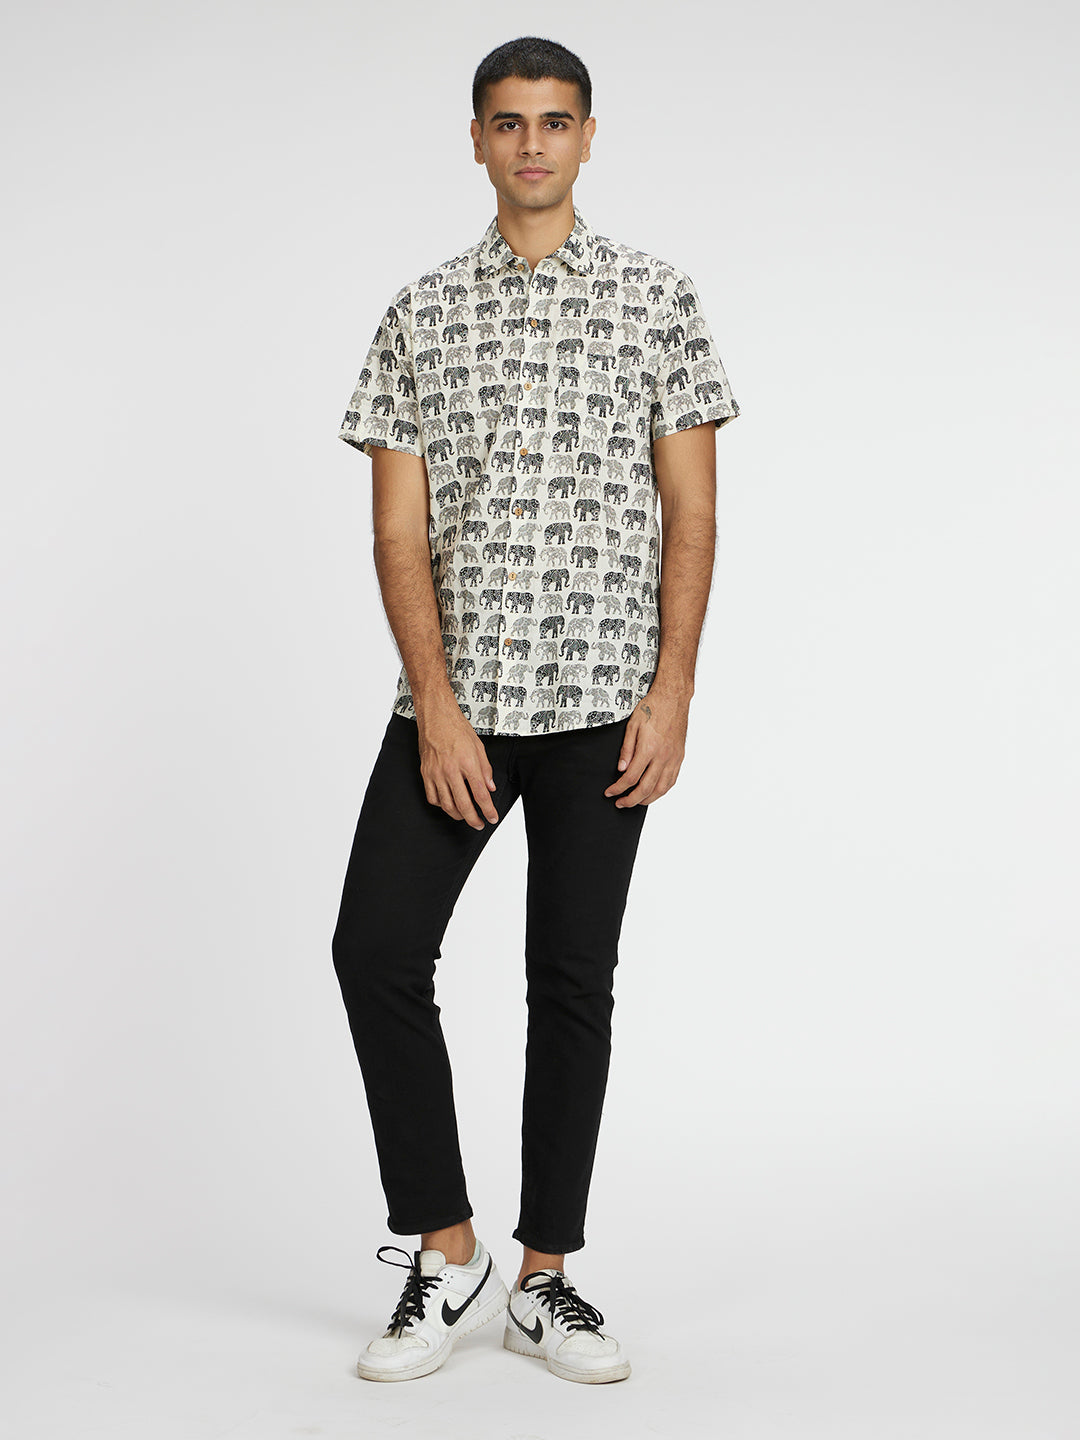 Black and white Elephant graphic Printed Halfsleeves Cotton Shirt